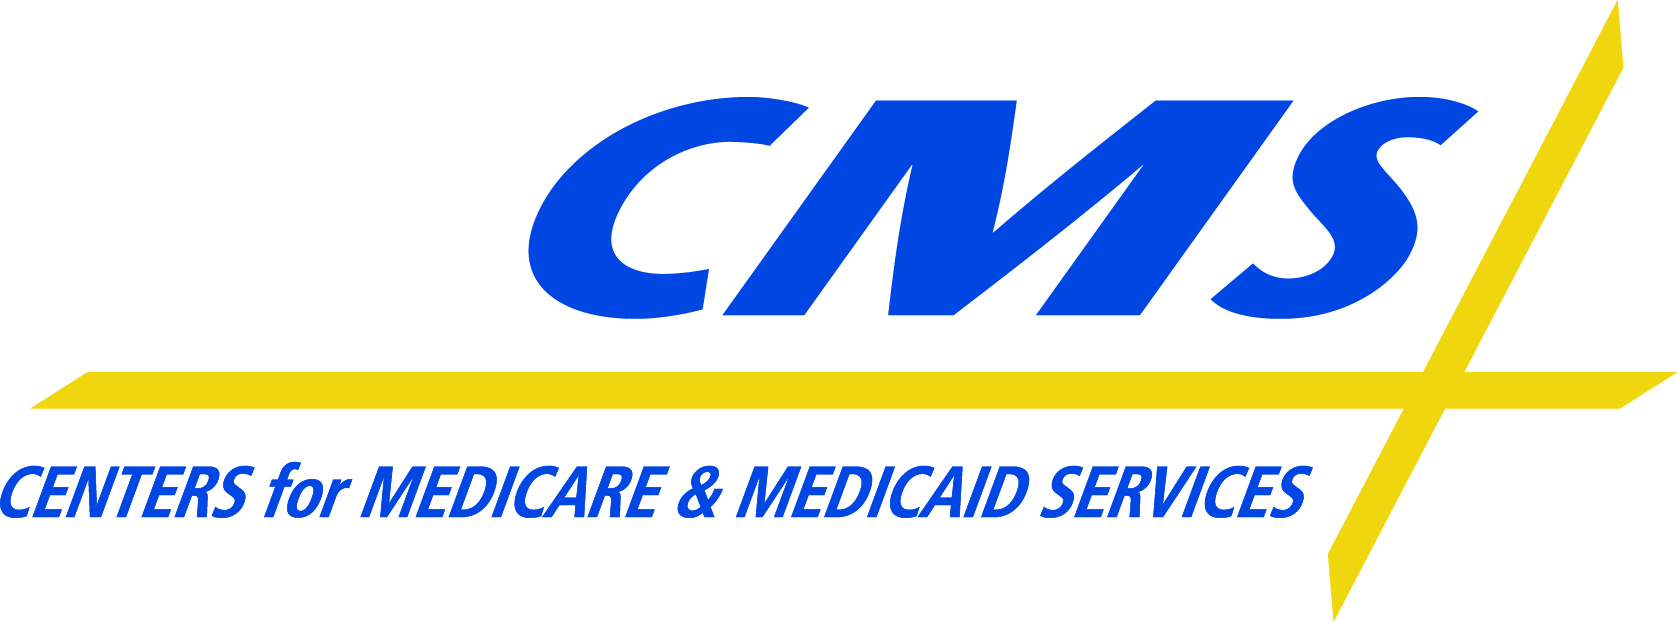 All are true of the centers for medicare and medicaid services except american medical association dodge cummins engines